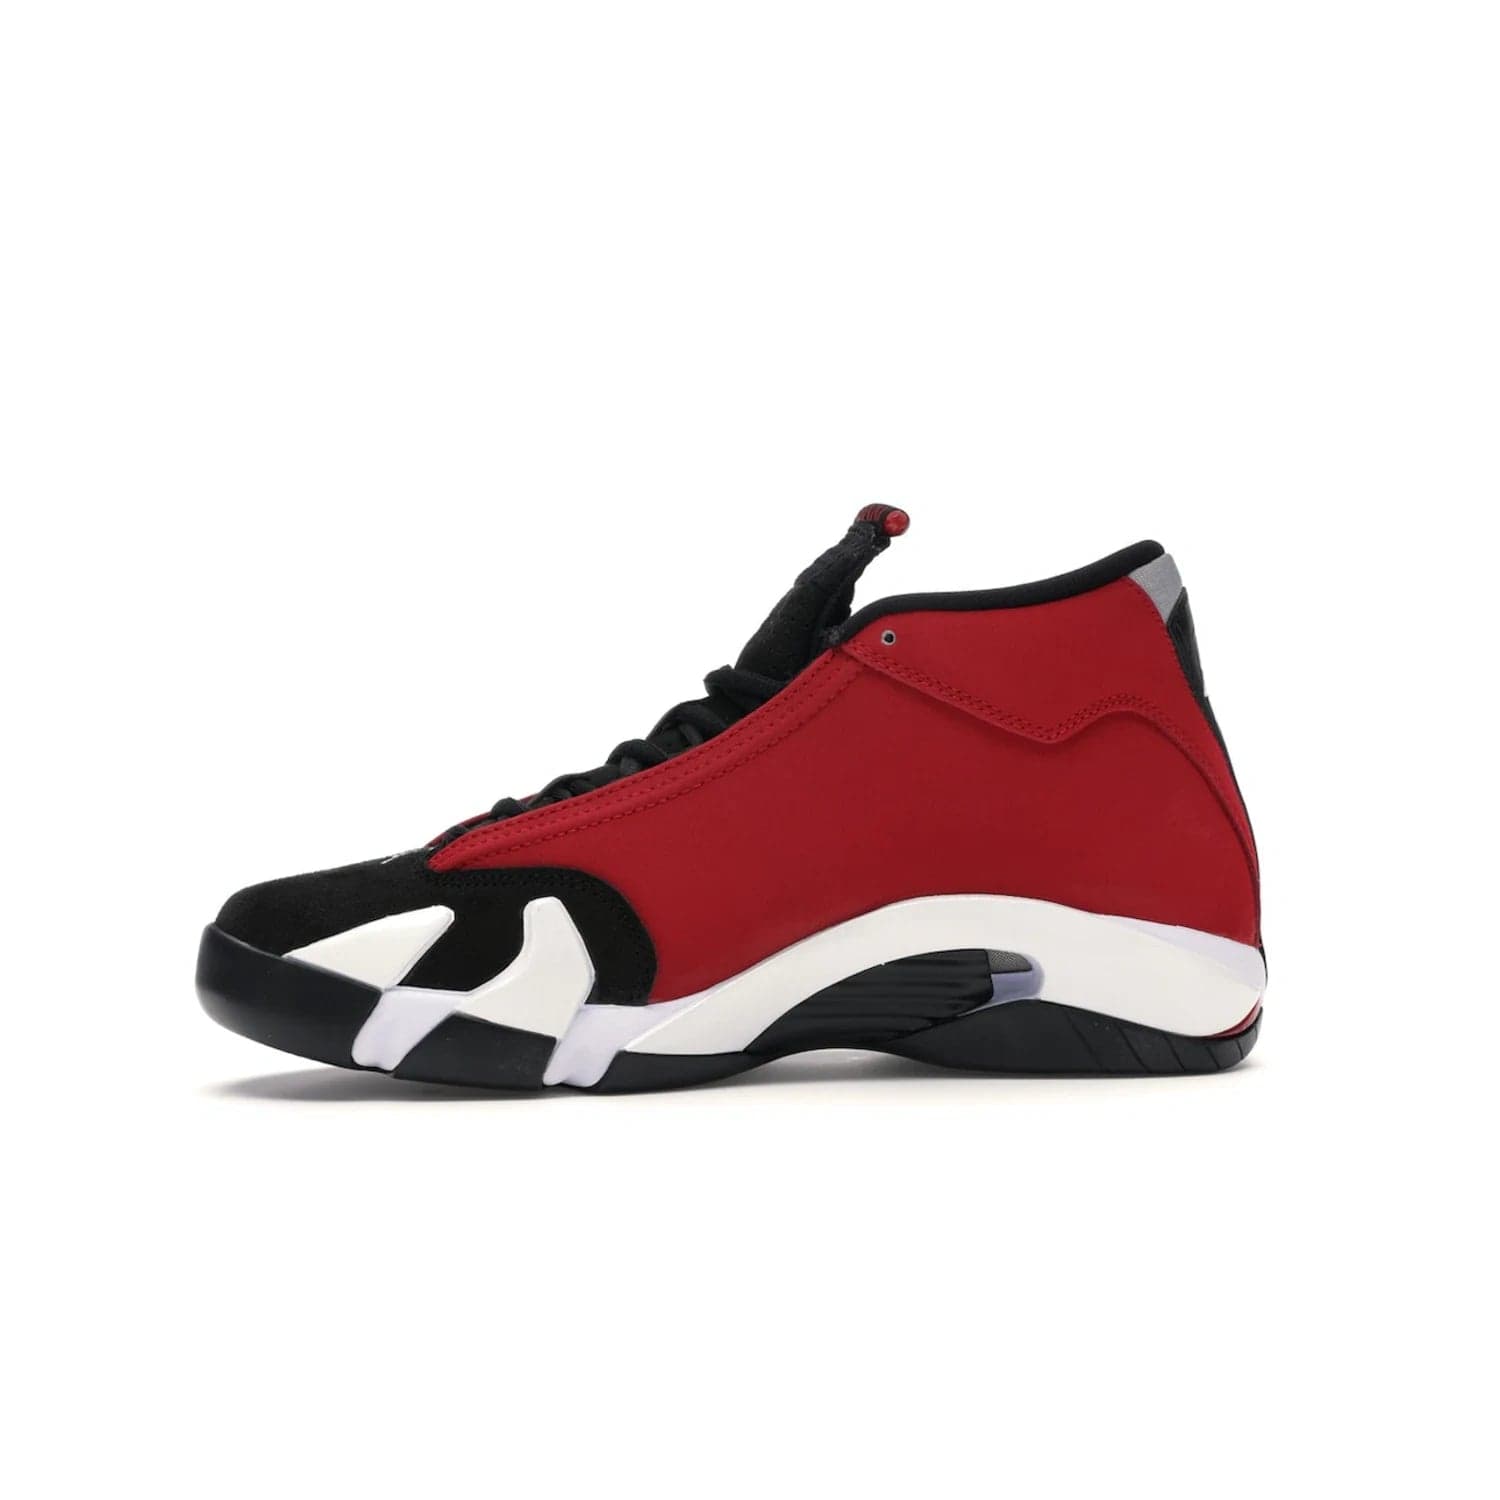 Jordan 14 Retro Gym Red Toro - Image 18 - Only at www.BallersClubKickz.com - Feel the Chicago Bulls energy with the Jordan 14 Retro Gym Red Toro! Black, red, and white design unites performance and fashion. Get your hands on this limited edition Jordan and show off your style today.